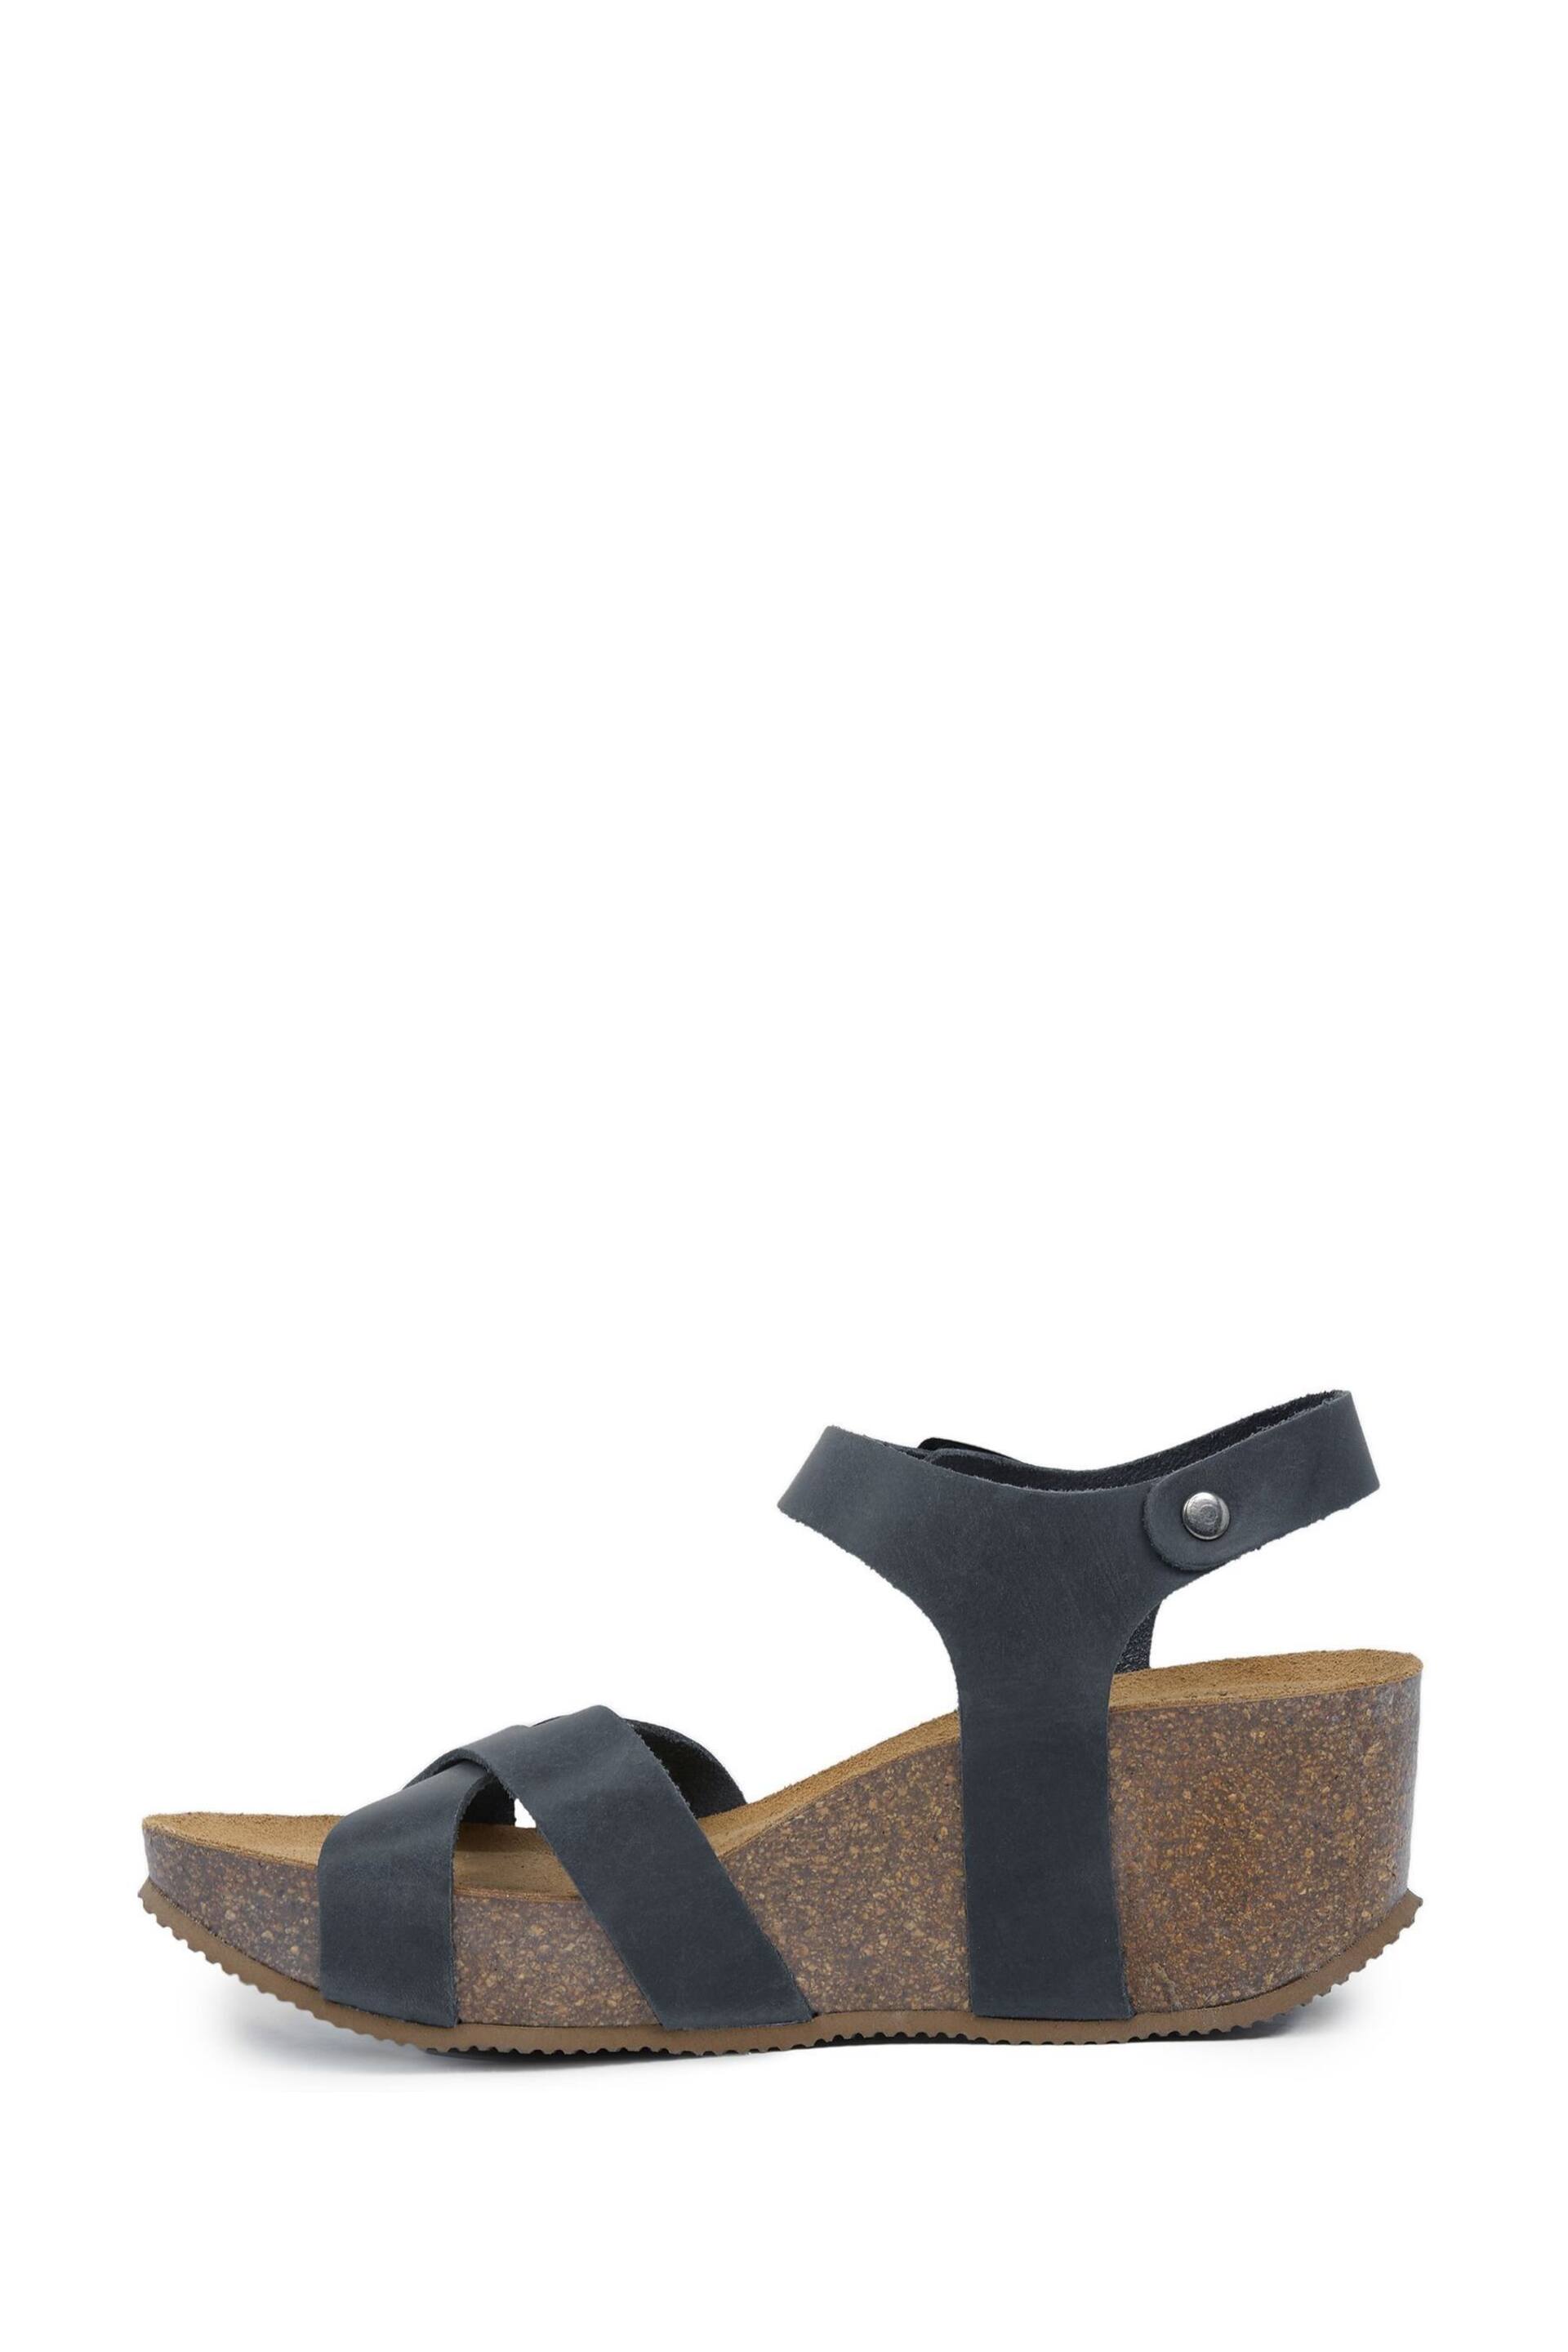 Celtic & Co. Blue Crossover Wedge Sandals - Image 2 of 7